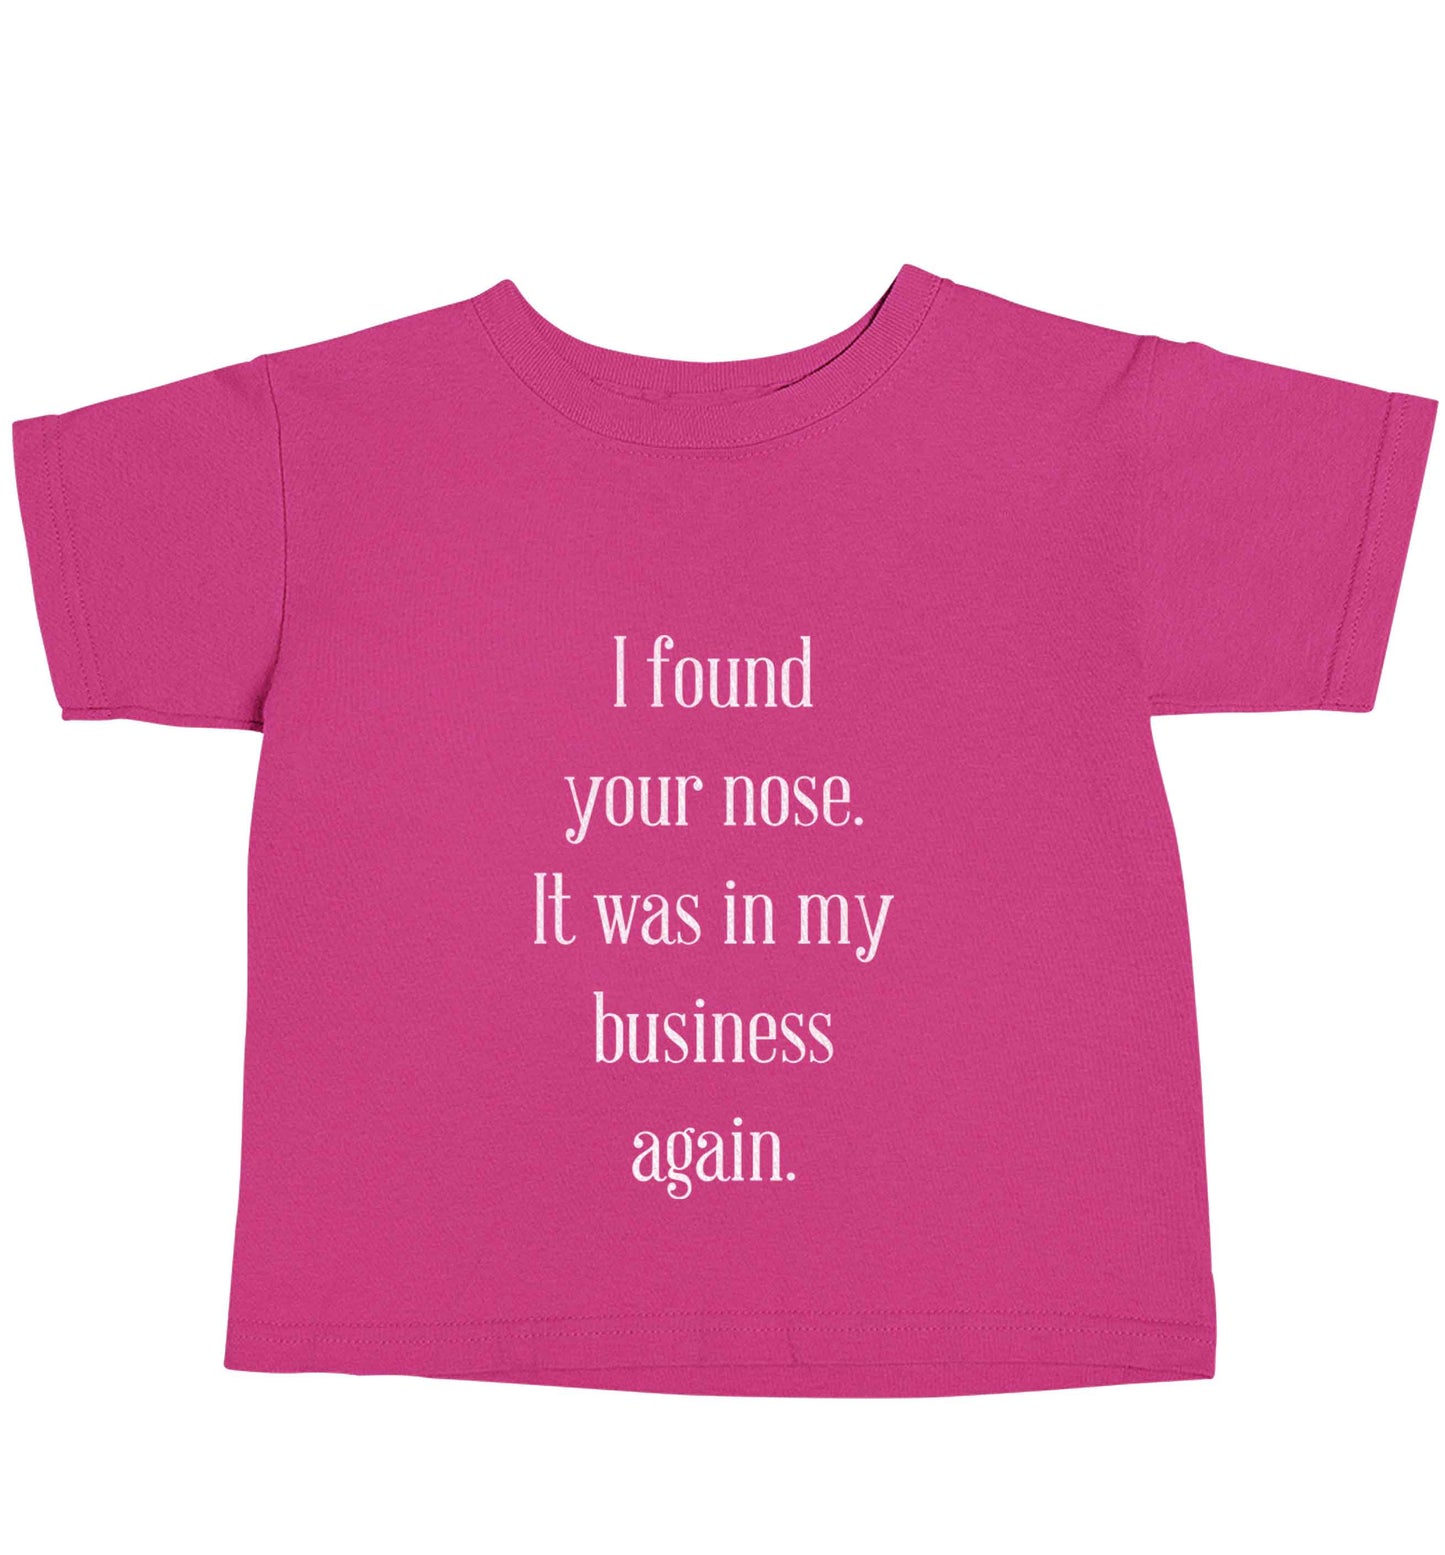 I found your nose it was in my business again pink baby toddler Tshirt 2 Years